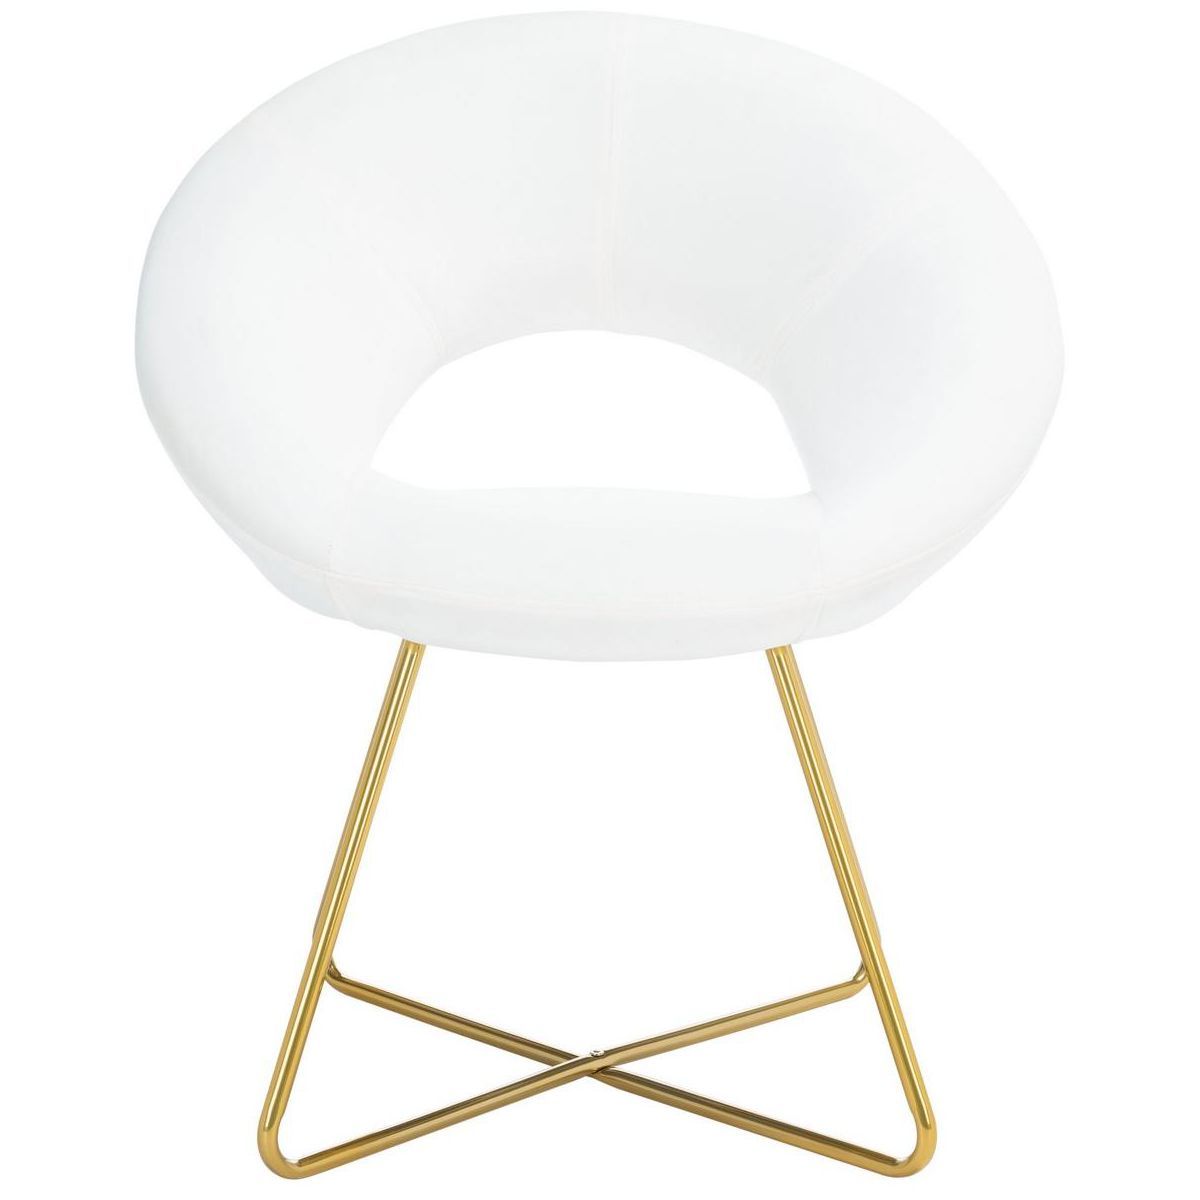 Aliena Accent Chair - Ivory/Gold - Safavieh. | Target